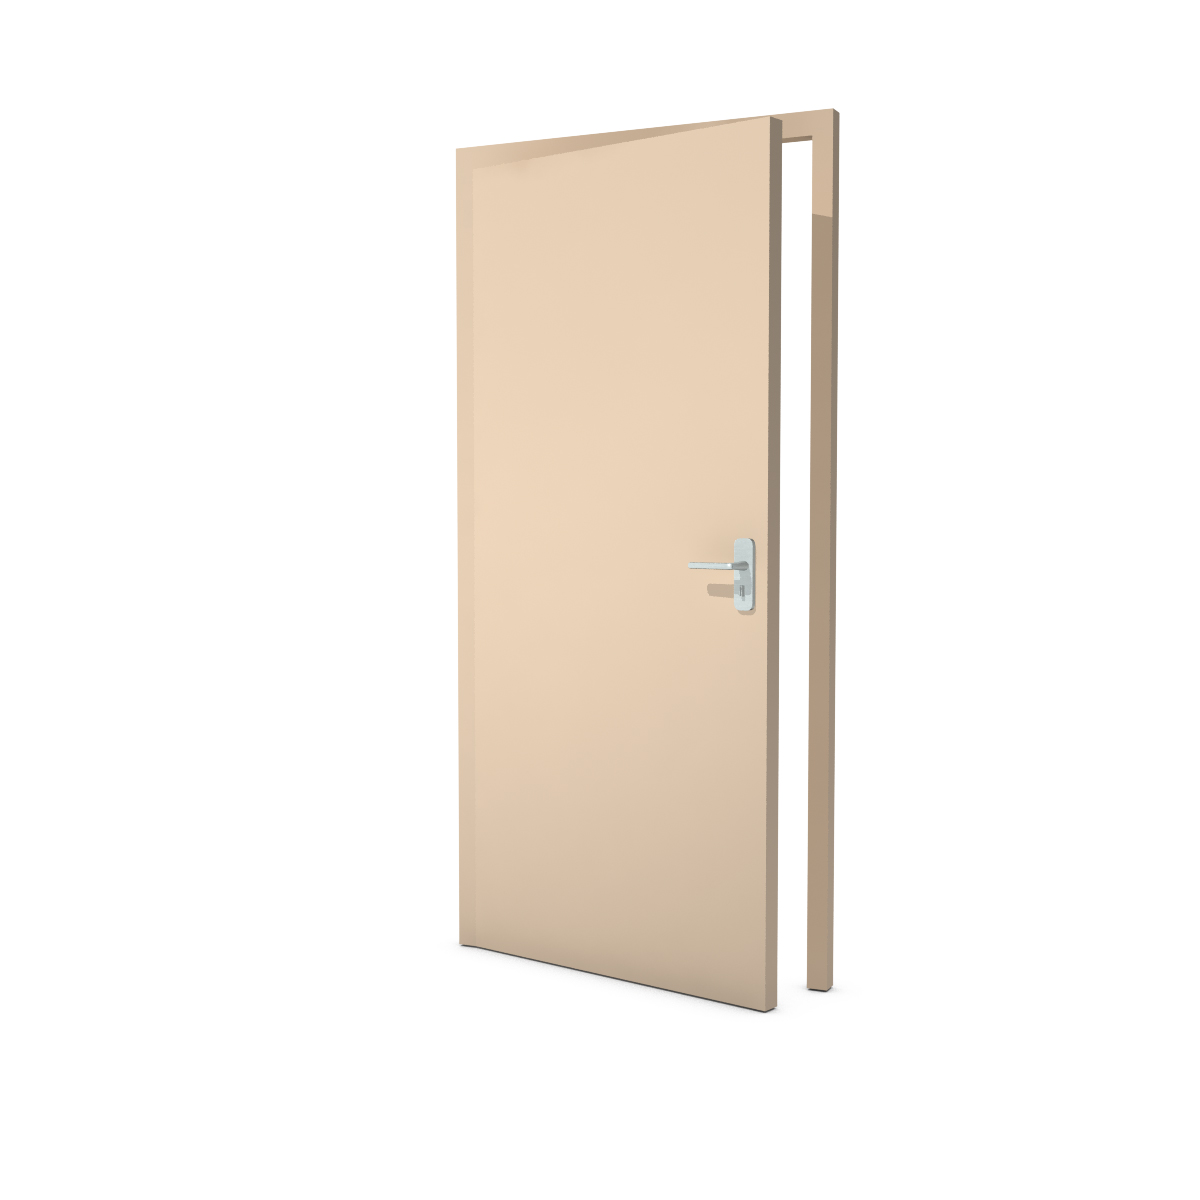 Single door covered in solid-color textile - Ivory